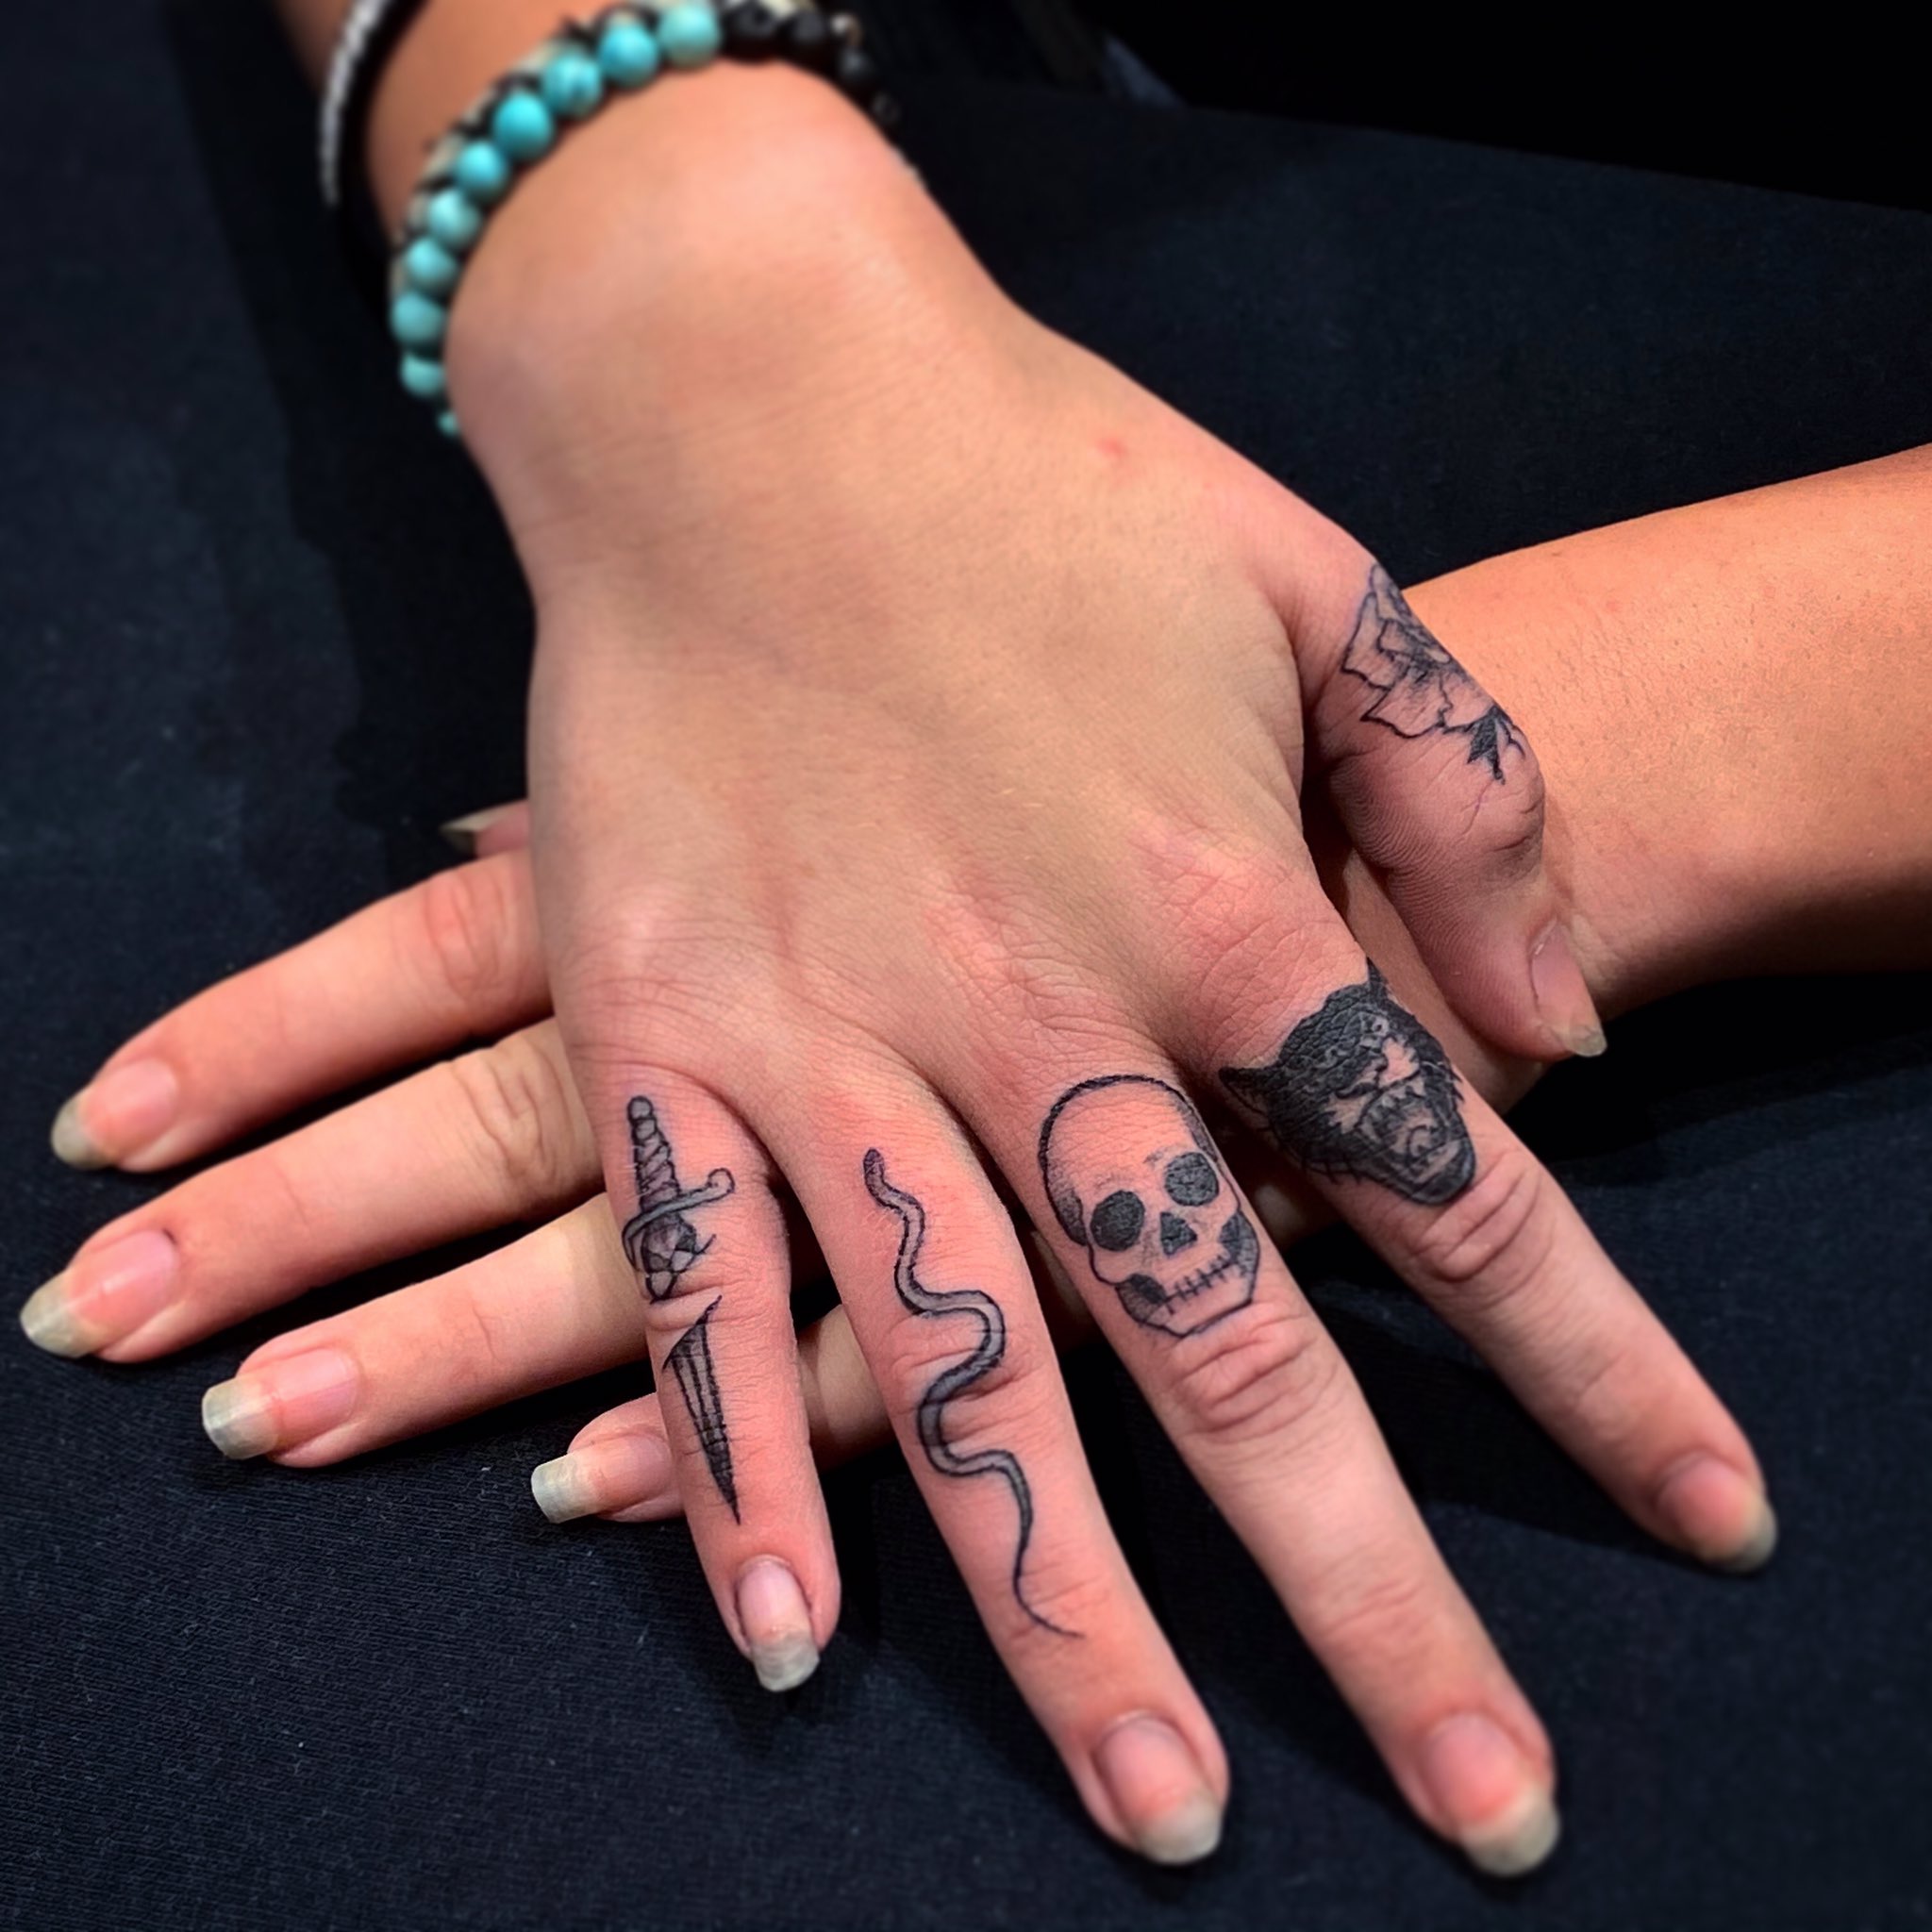 Valkyrie Tattoo - His and hers thumb tattoos! Hands often heal  unpredictably and can blot or wear off over time. If you do some research  and that's still okay then let's go